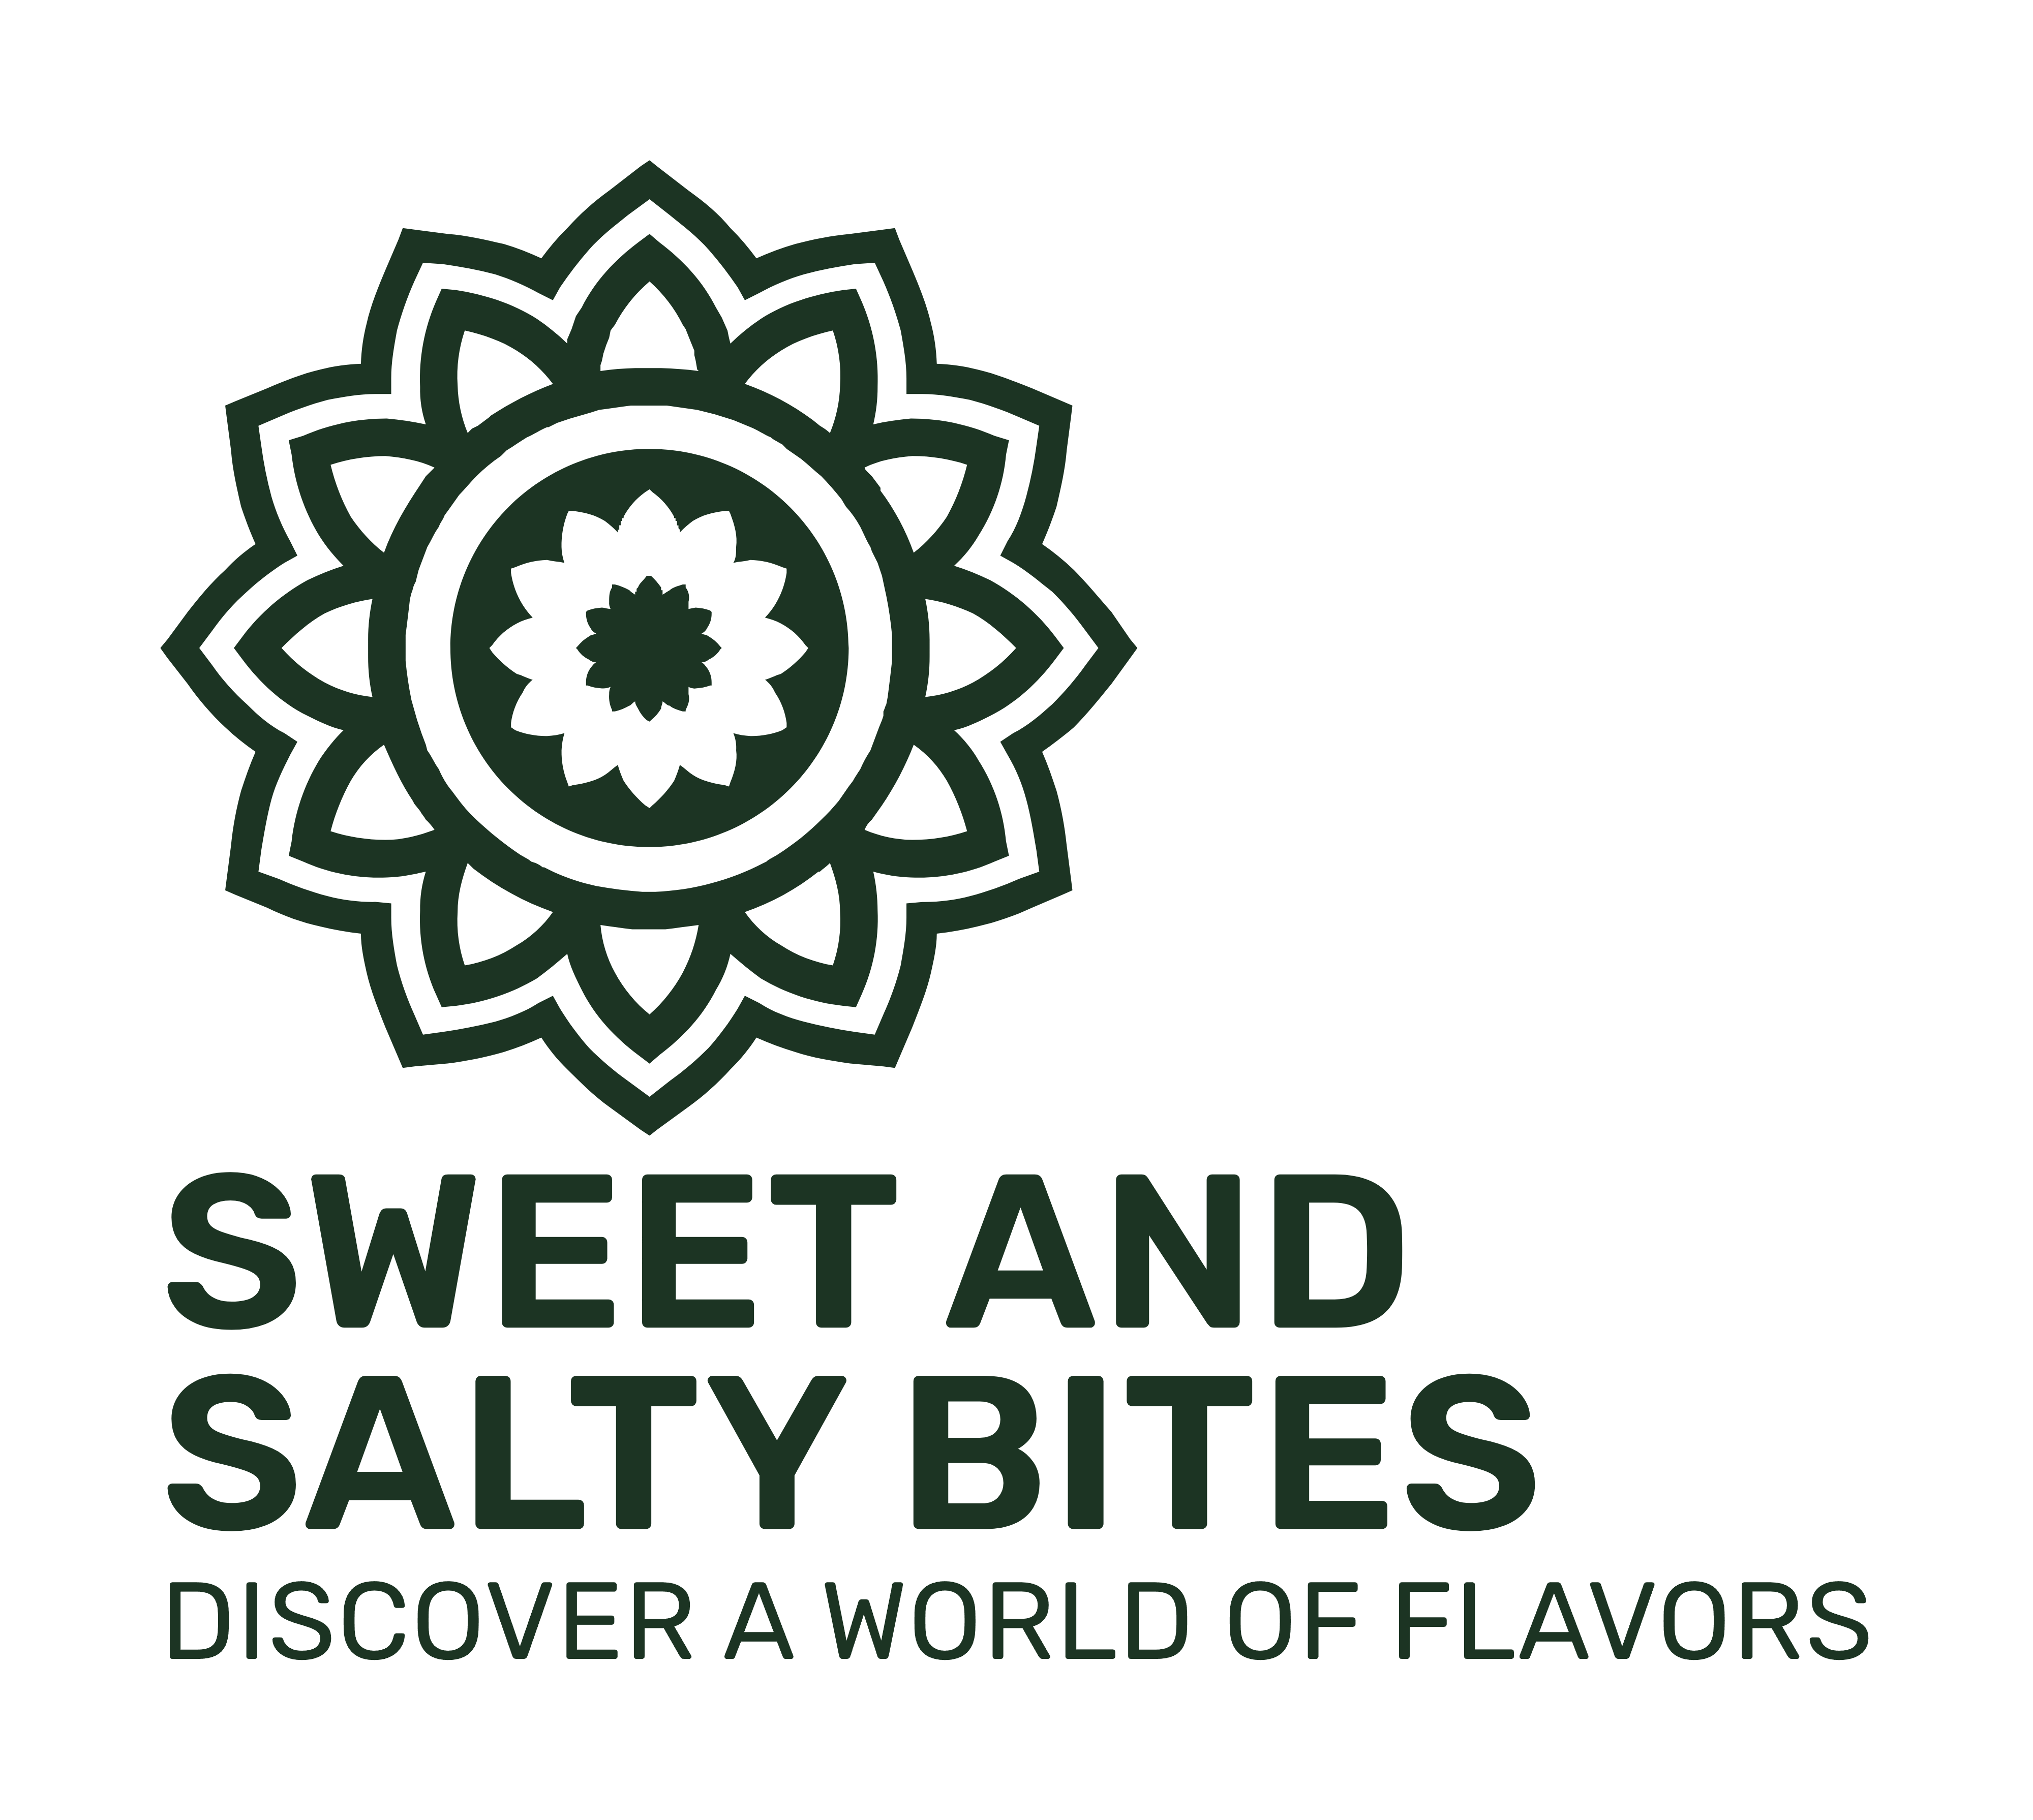 Sweet and Salty Bites